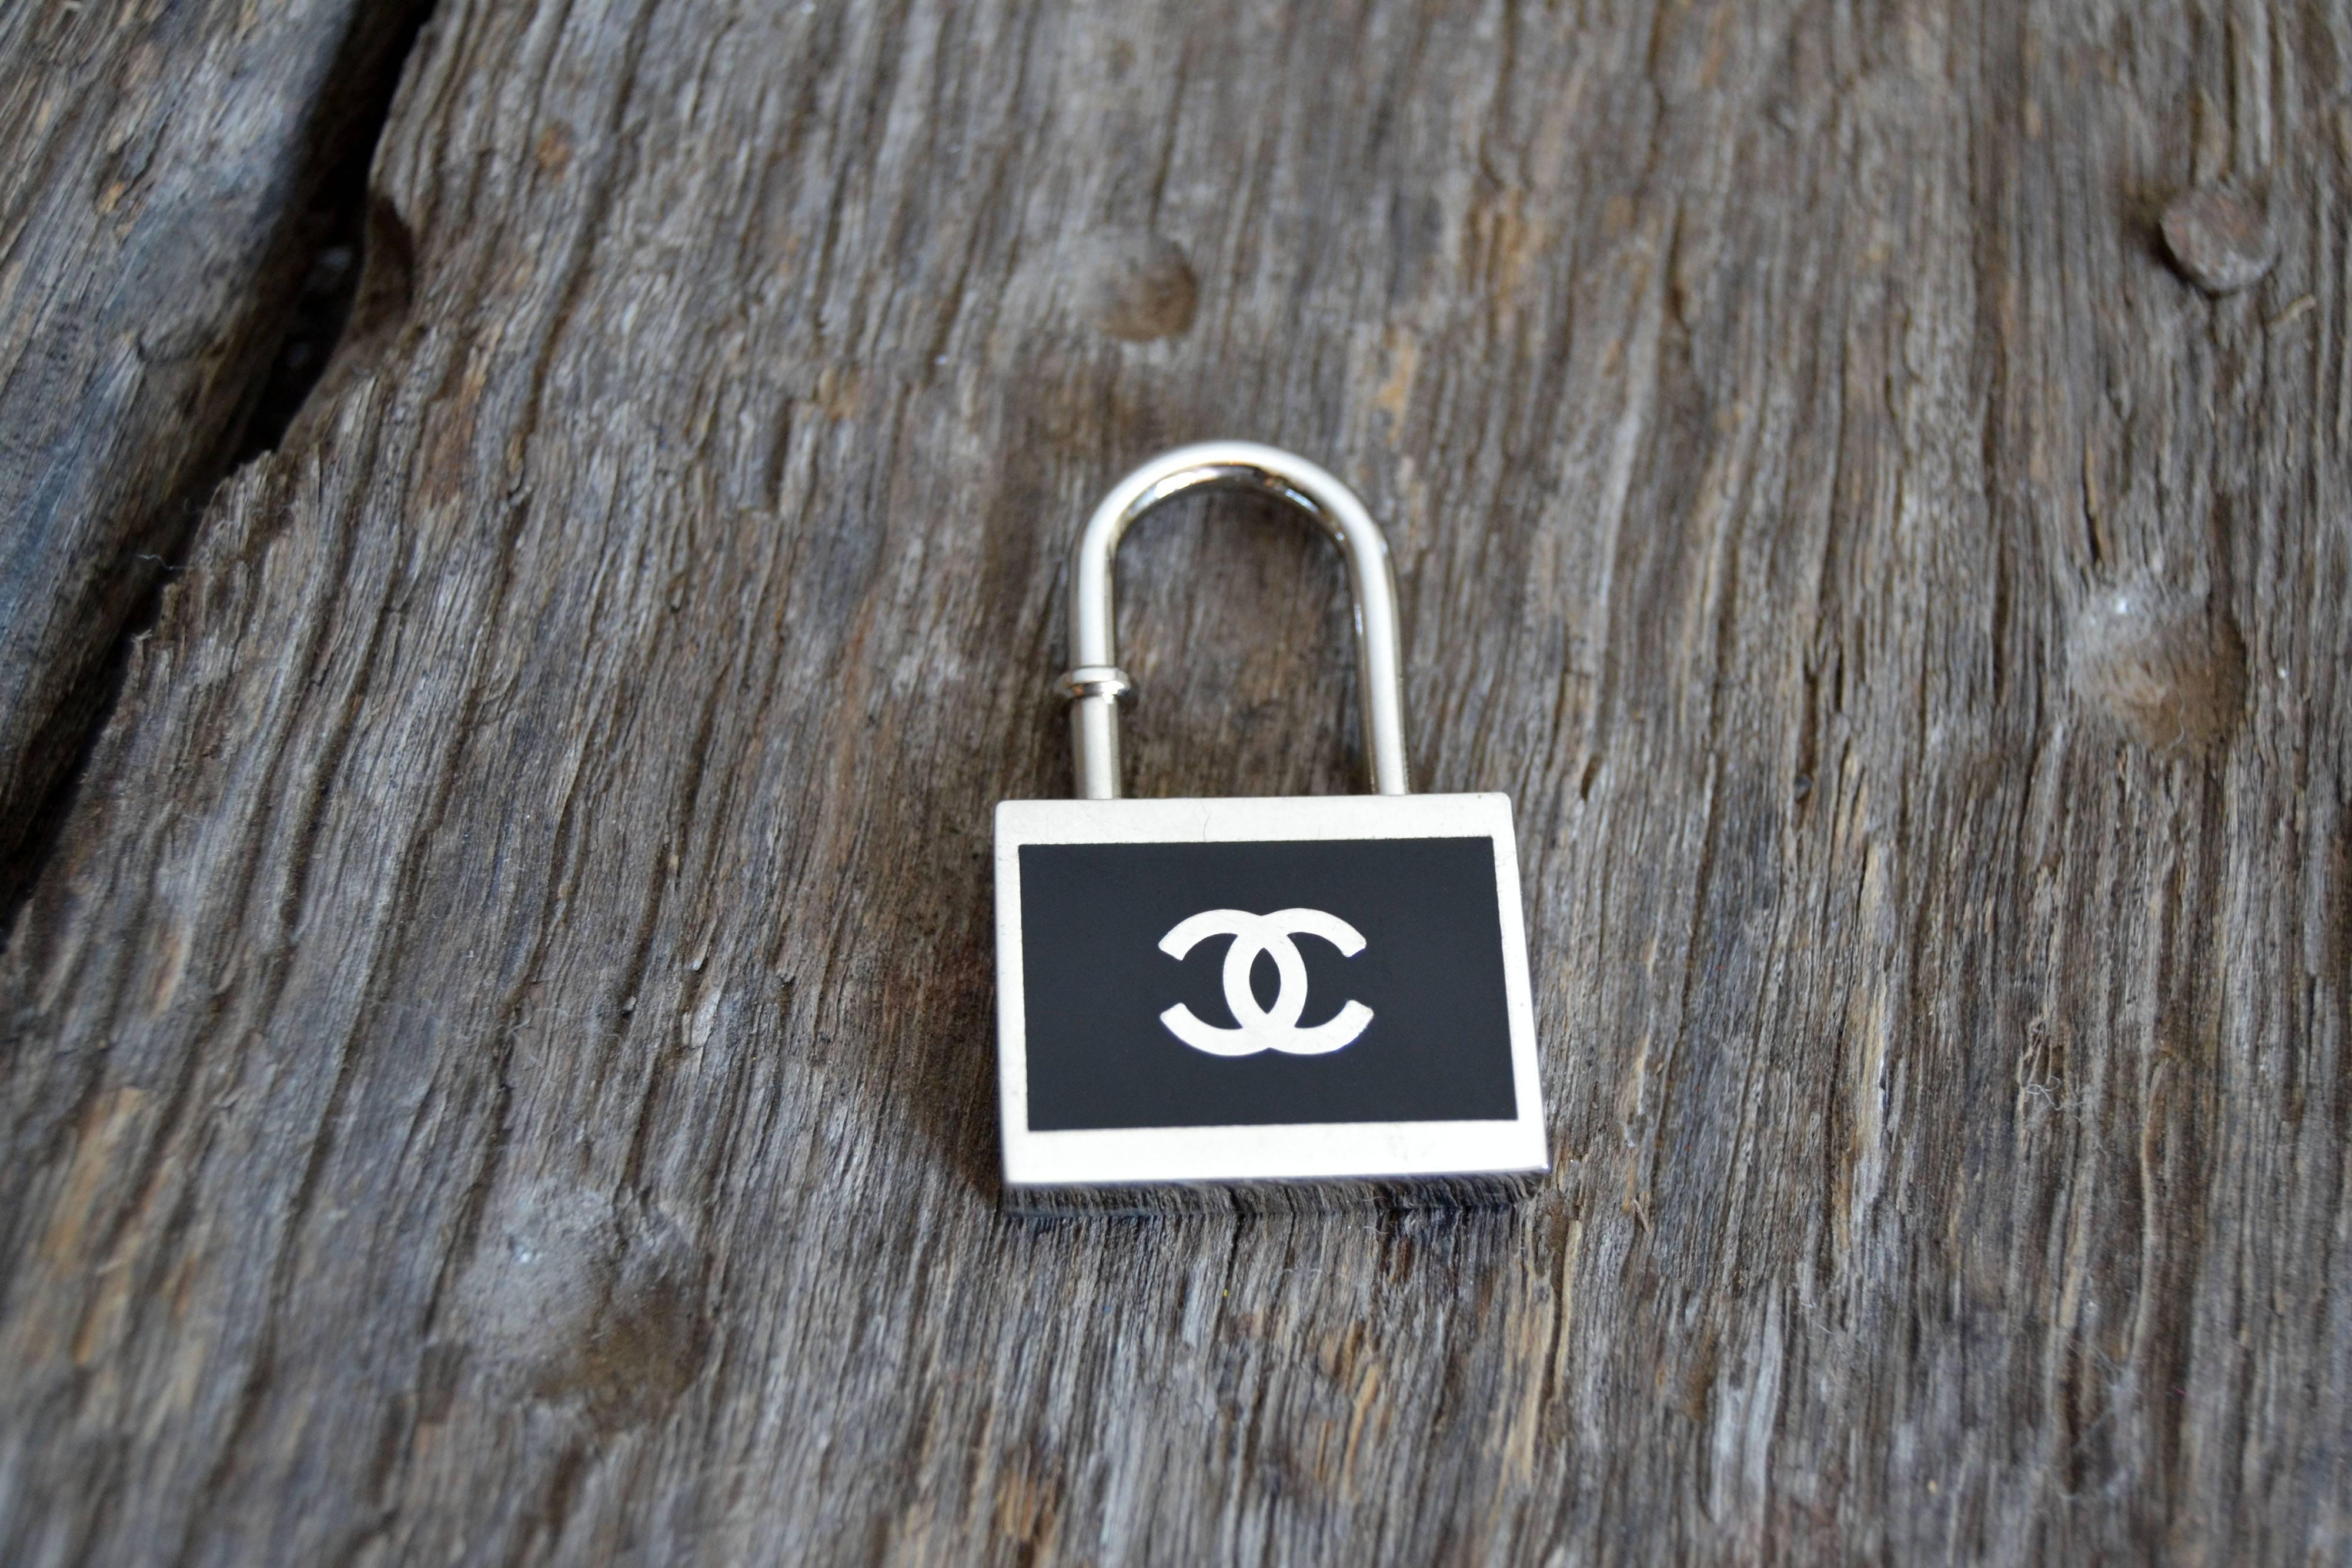 Very handsome key chain in the style of Chanel, purse charm or necklace pendant in excellent condition.

This black and silvertone padlock style key chain is very handsome and in excellent condition. At least, we are calling it a key chain;